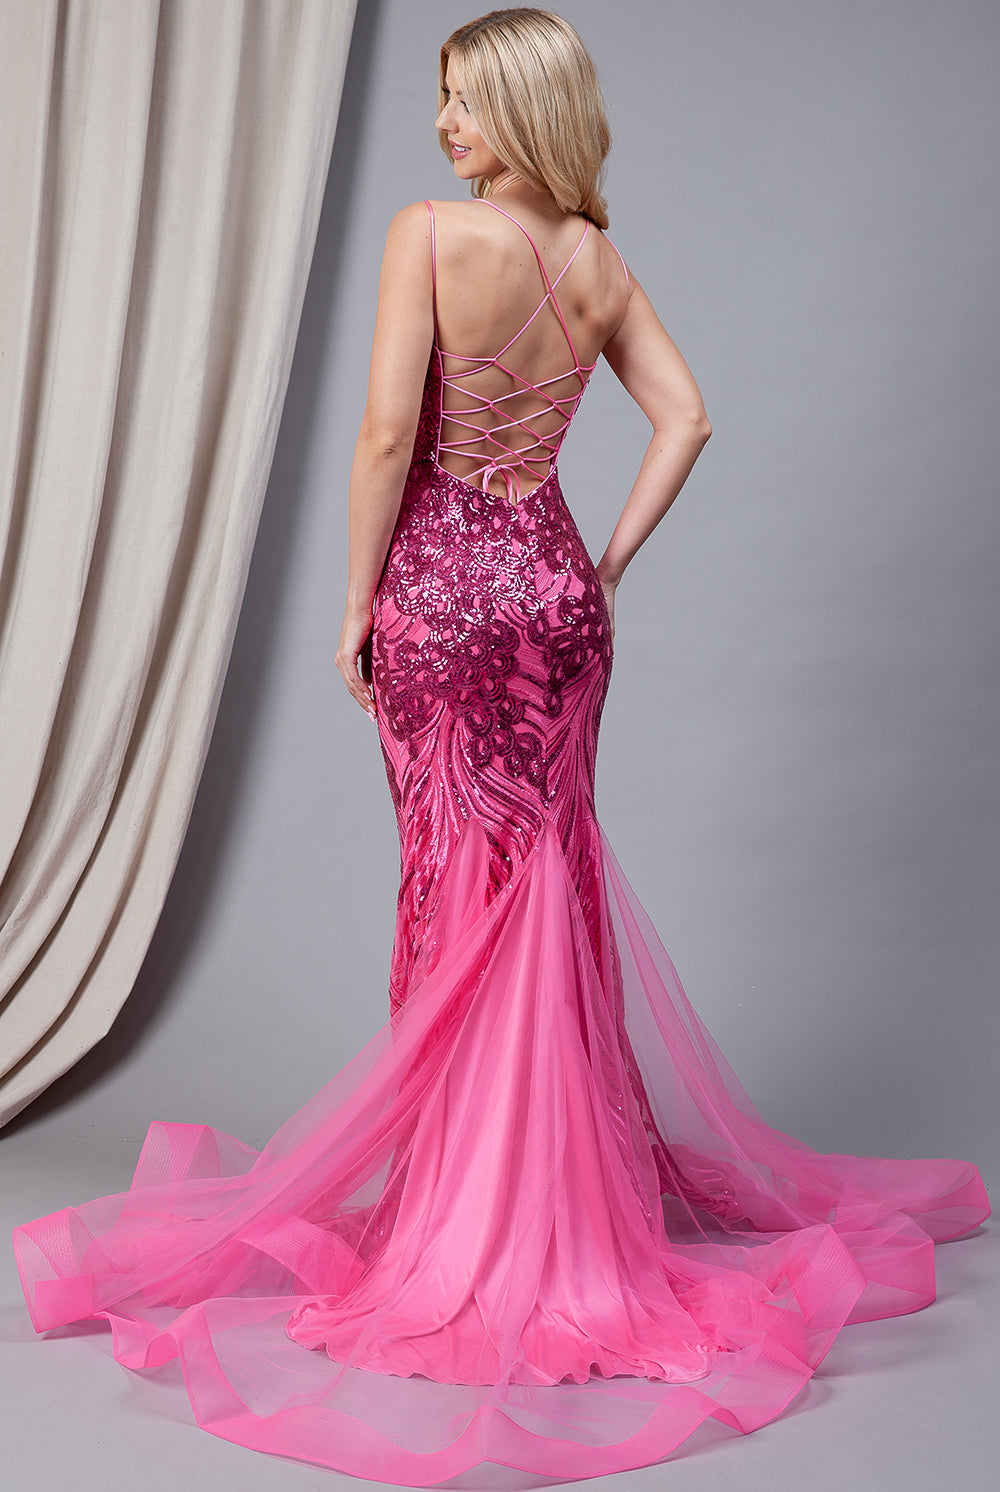 V-Neck Long Prom Dress w/ Embroidered Sequins Tulle Skirt-smcdress